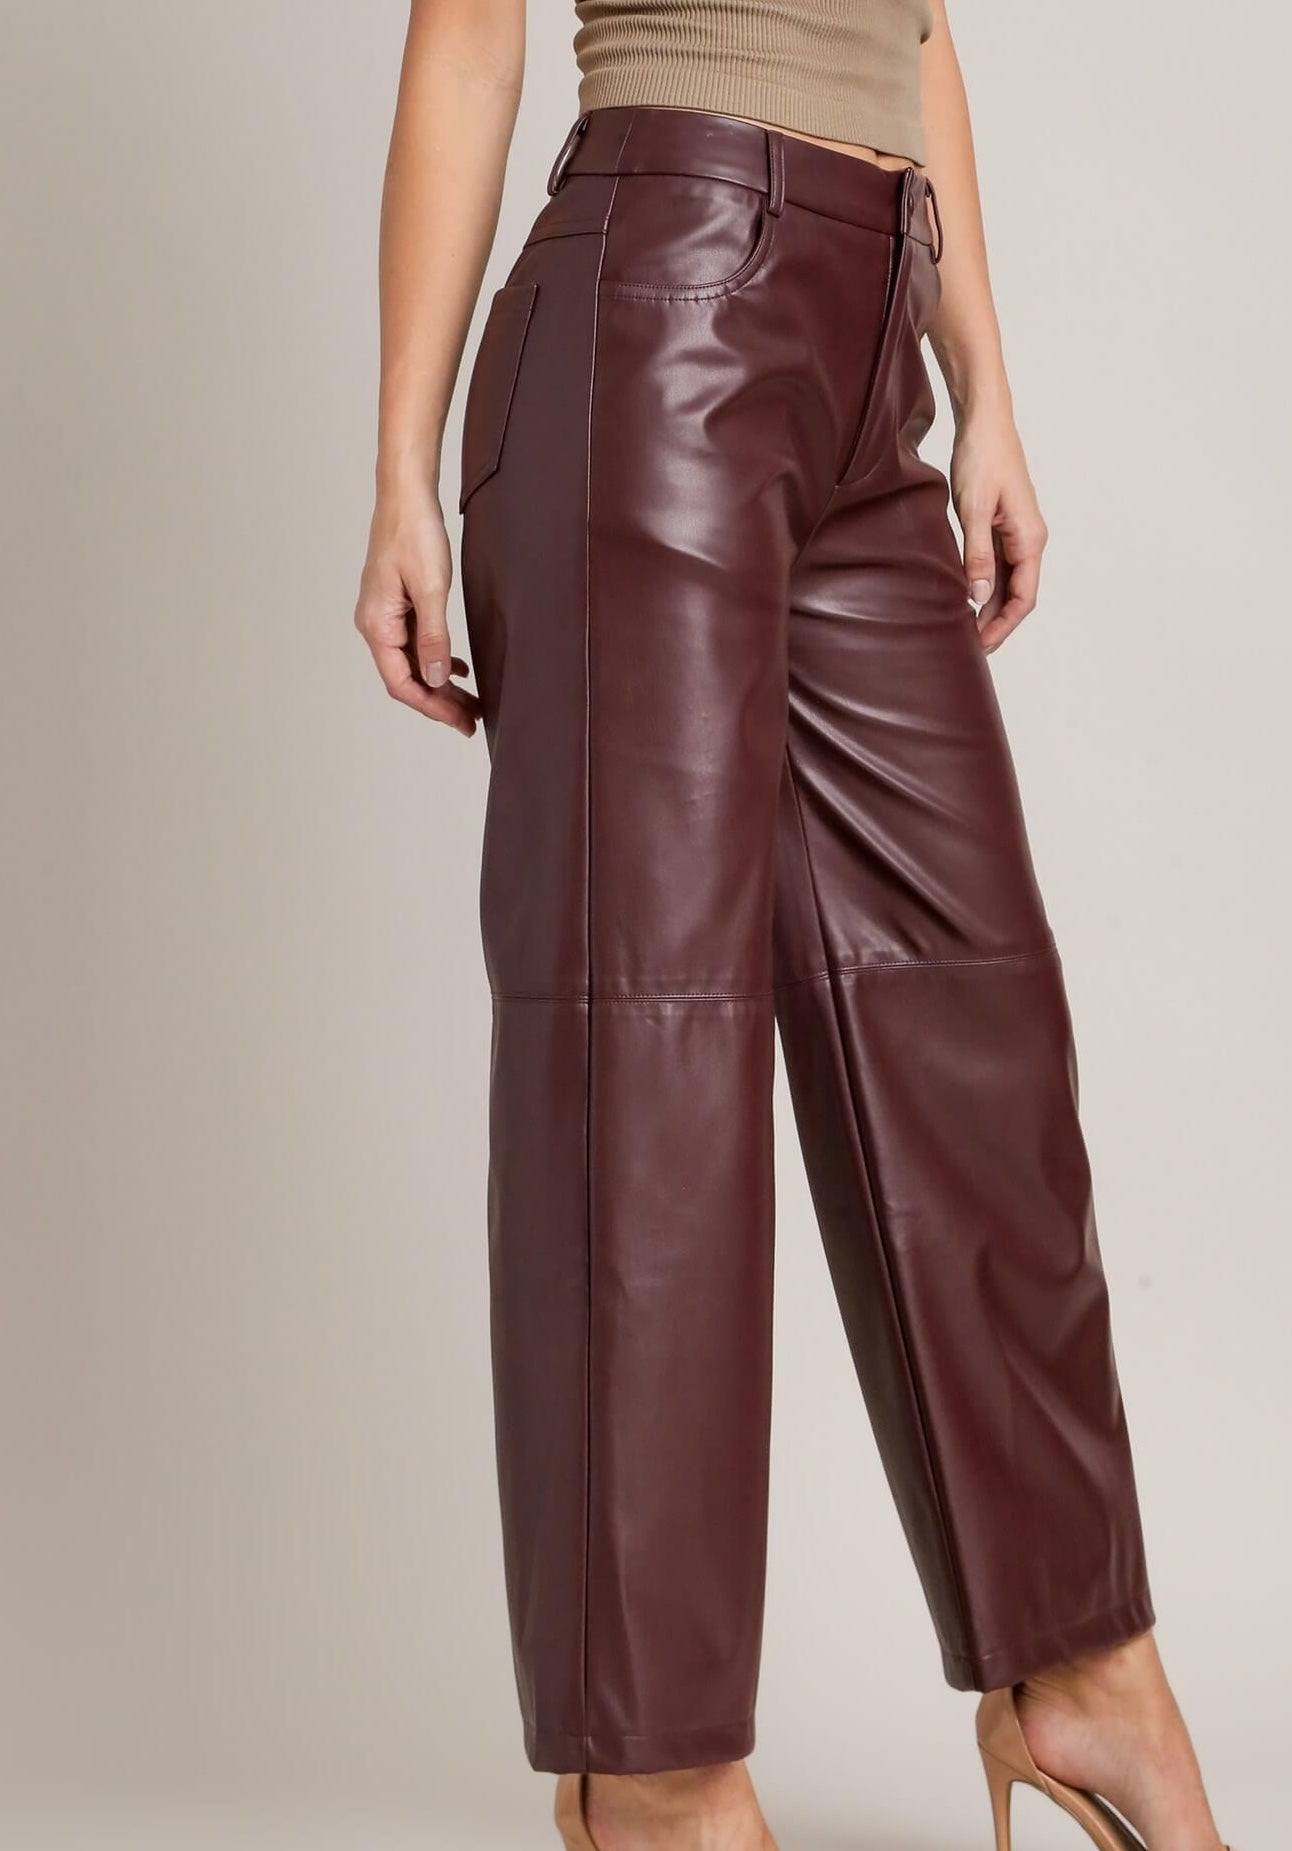 Buy Off Duty India Jet Black Wide Leg Leather Pant online